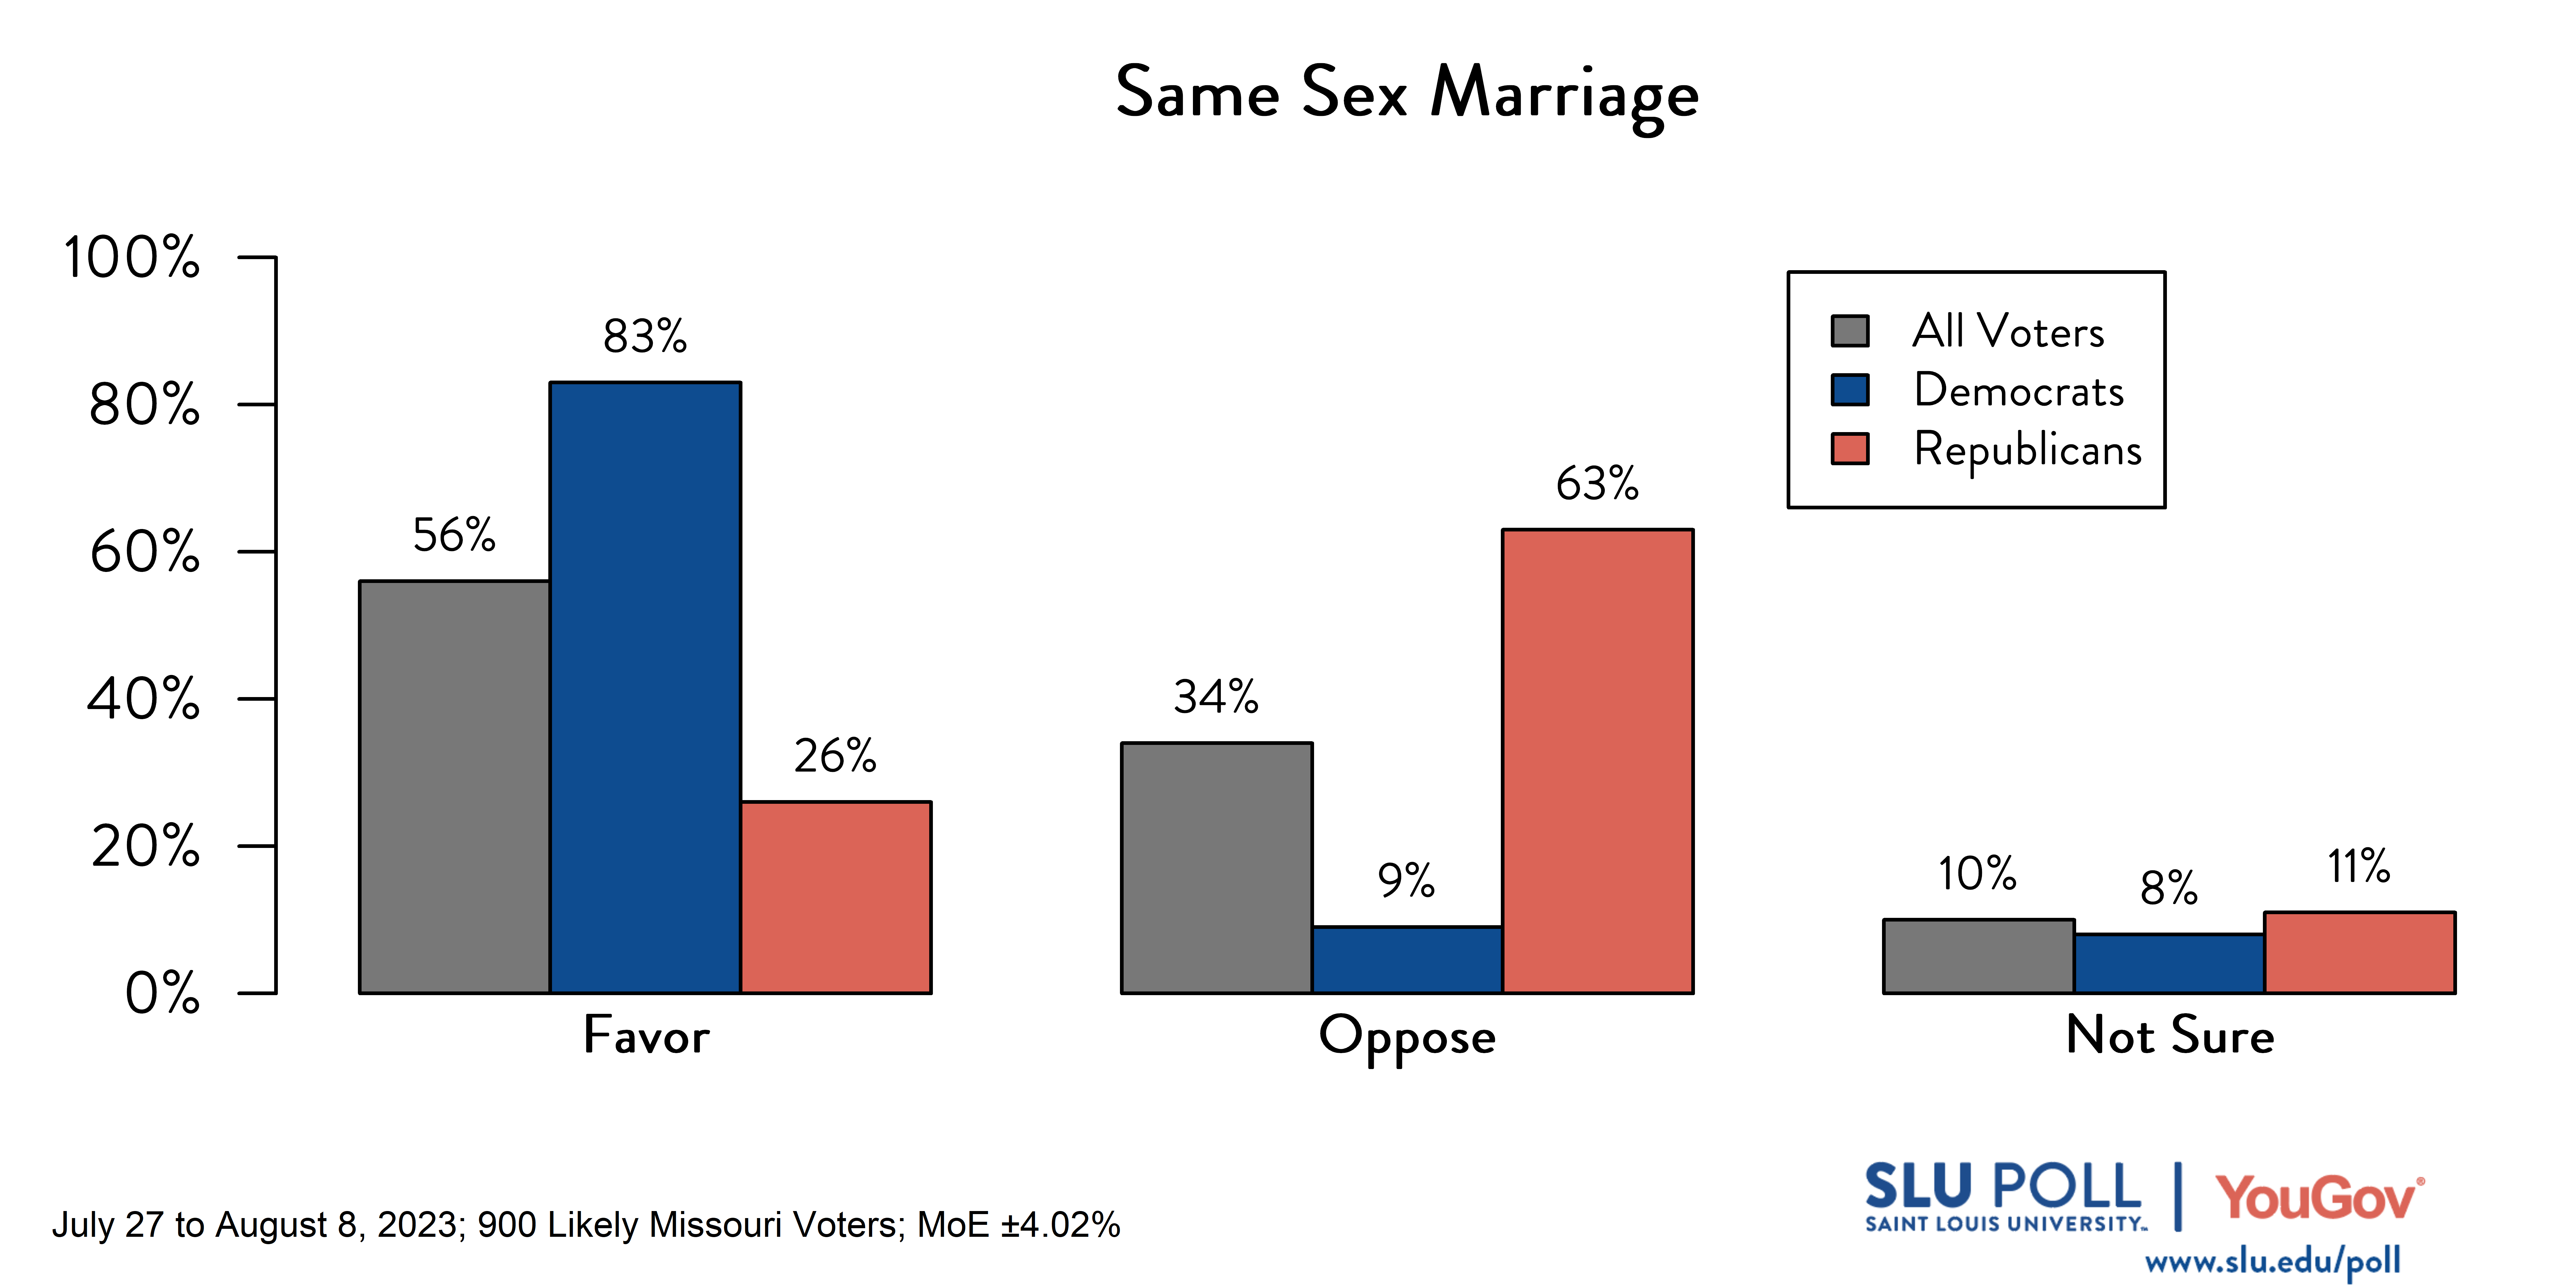 Likely voters' responses to 'Do you favor or oppose the following policies: Marriages between same-sex couples should be recognized by the law as valid, with the same rights as traditional marriages.': 56% Favor, 34% Oppose, and 10% Not Sure. Democratic voters' responses: ' 83% Favor, 9% Oppose, and 8% Not Sure. Republican voters' responses: 26% Favor, 63% Oppose, and 11% Not Sure.